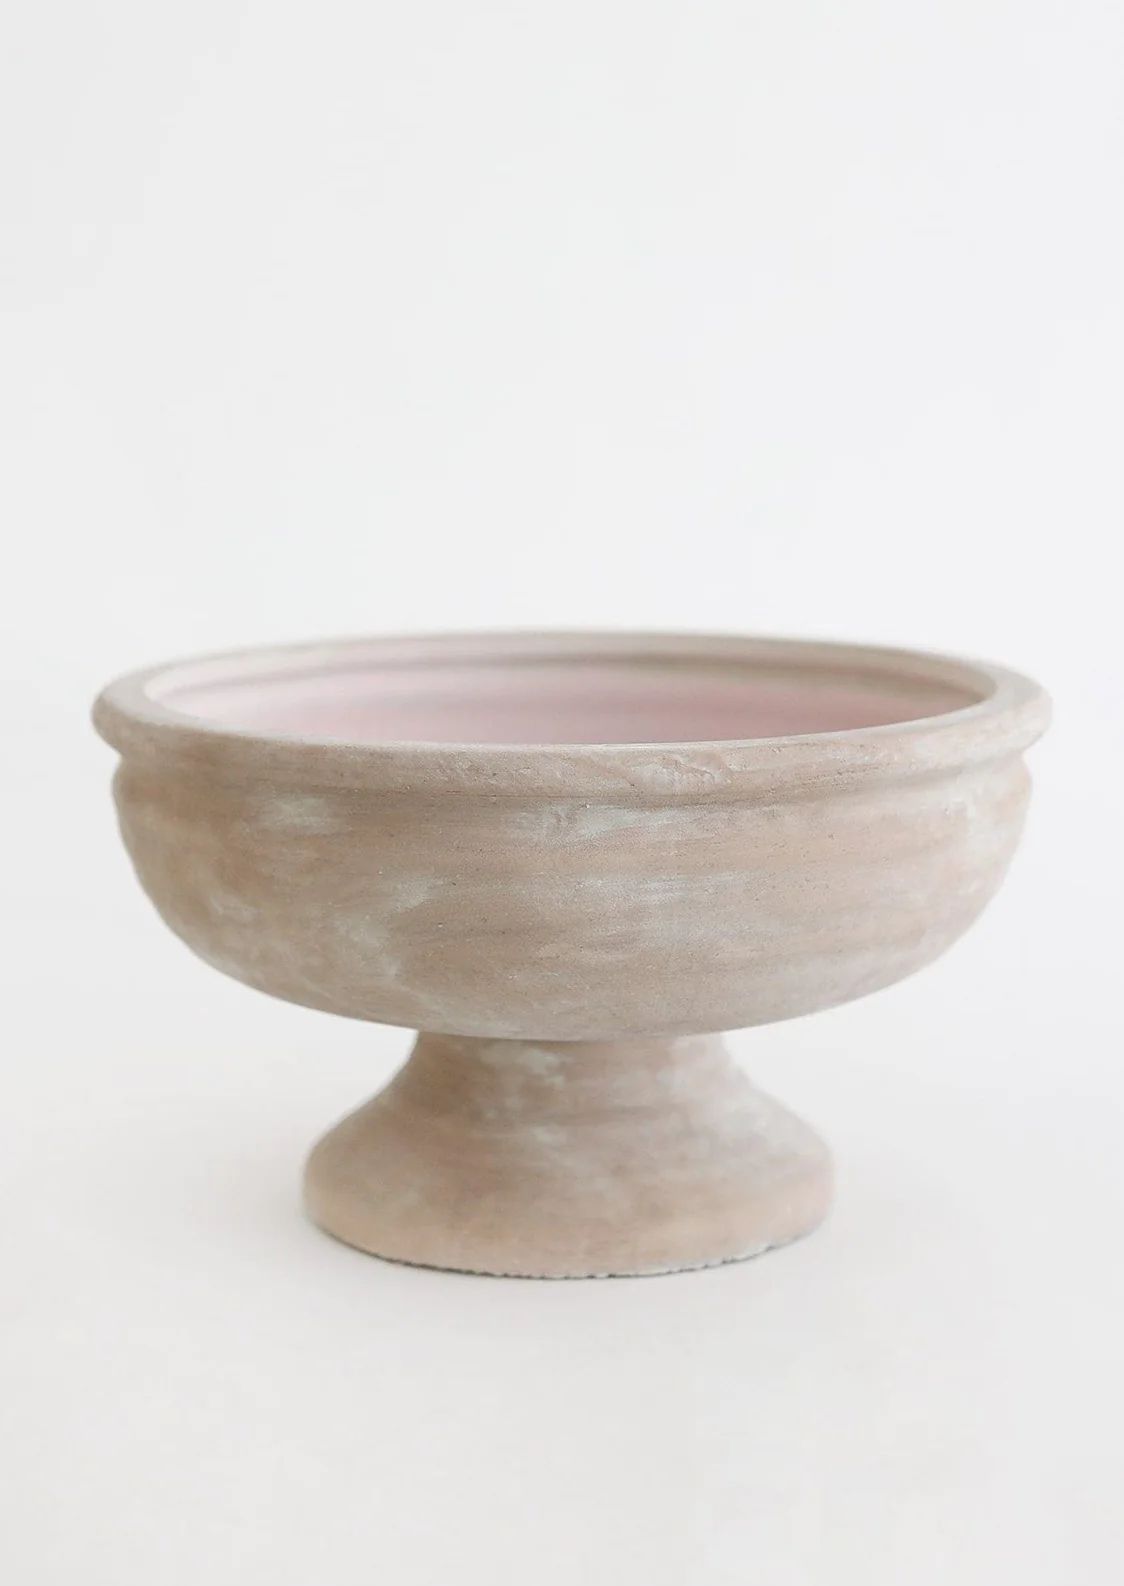 Earthy Mauve Ceramic Compote Bowl - 10.25" Wide | Afloral